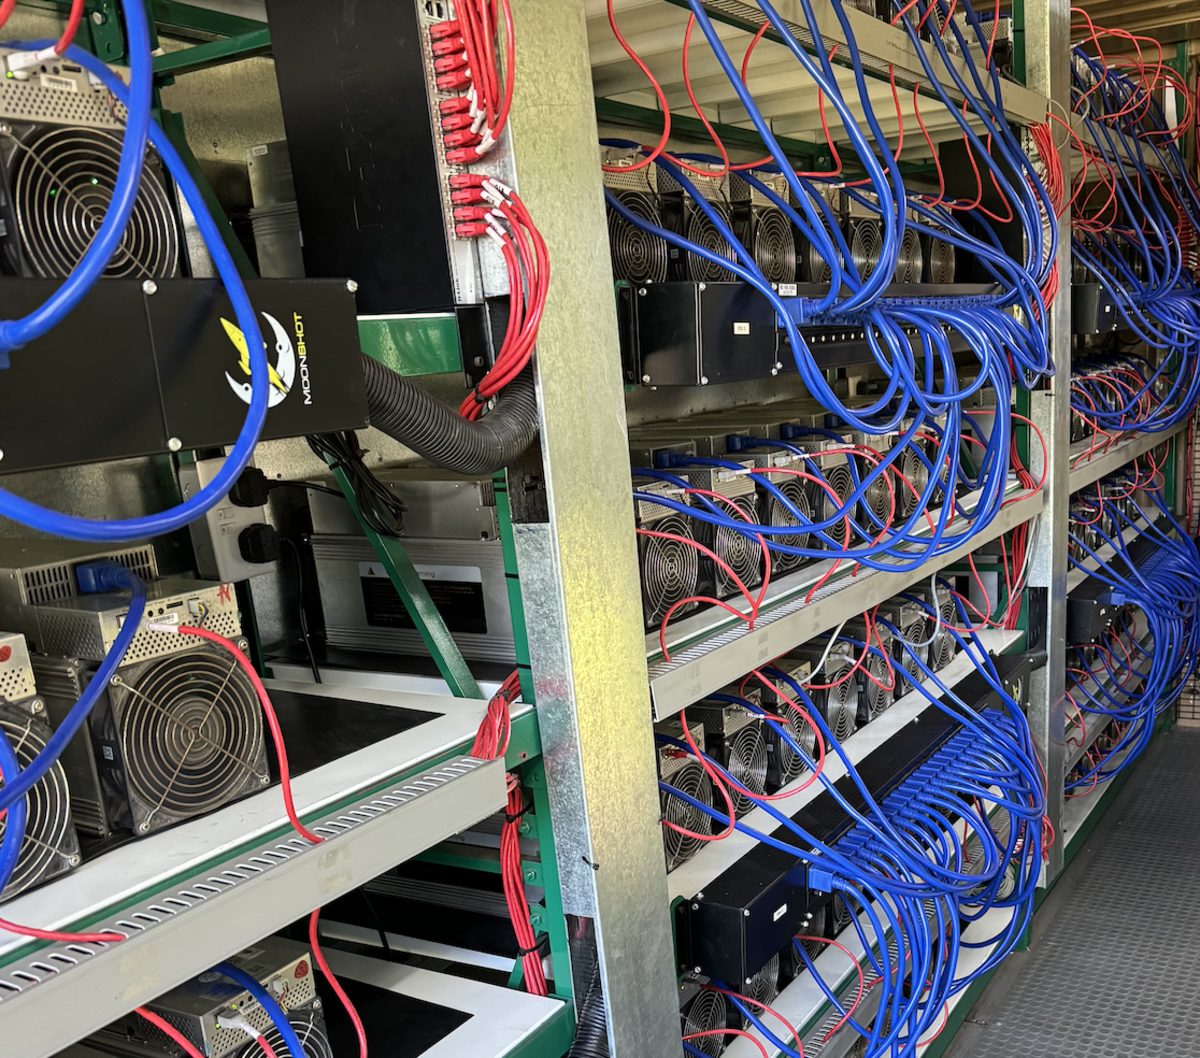 A peek at the 144 Whatsminer ASICs inside the custom-built shipping container